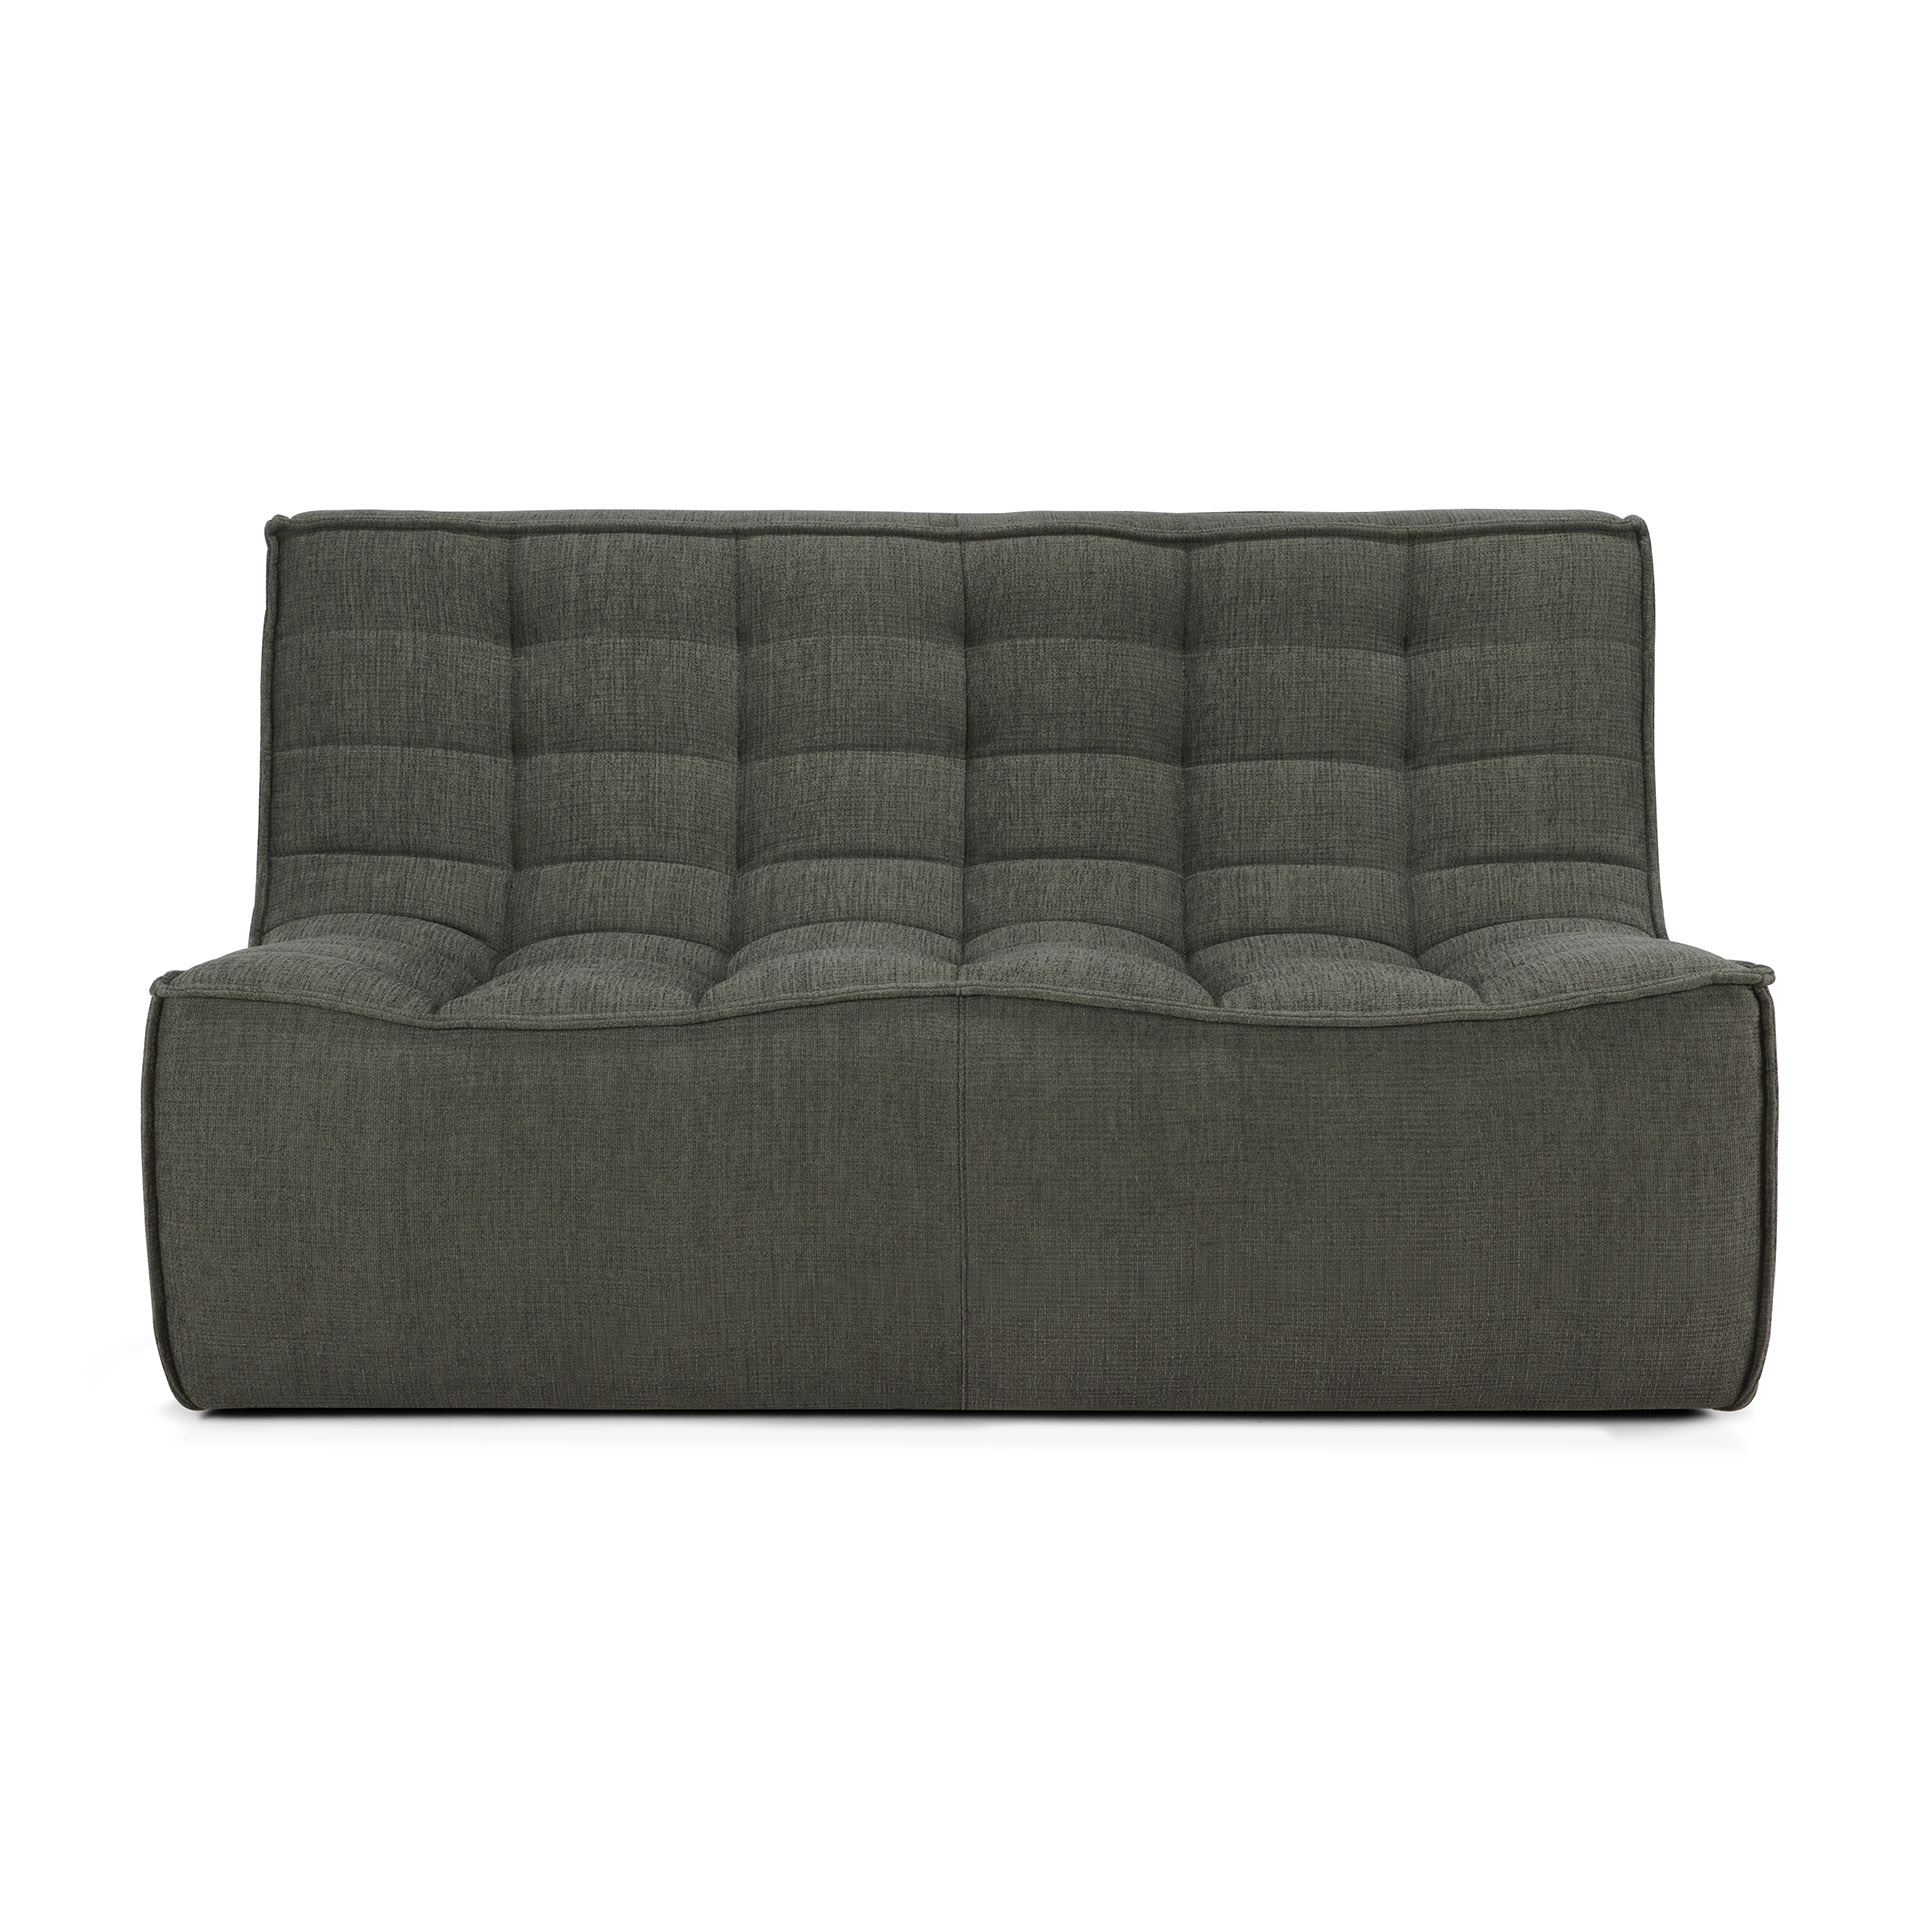 20255_Sofa_N701_2_seater_Moss_Eco_fabric_front_cut_WEB